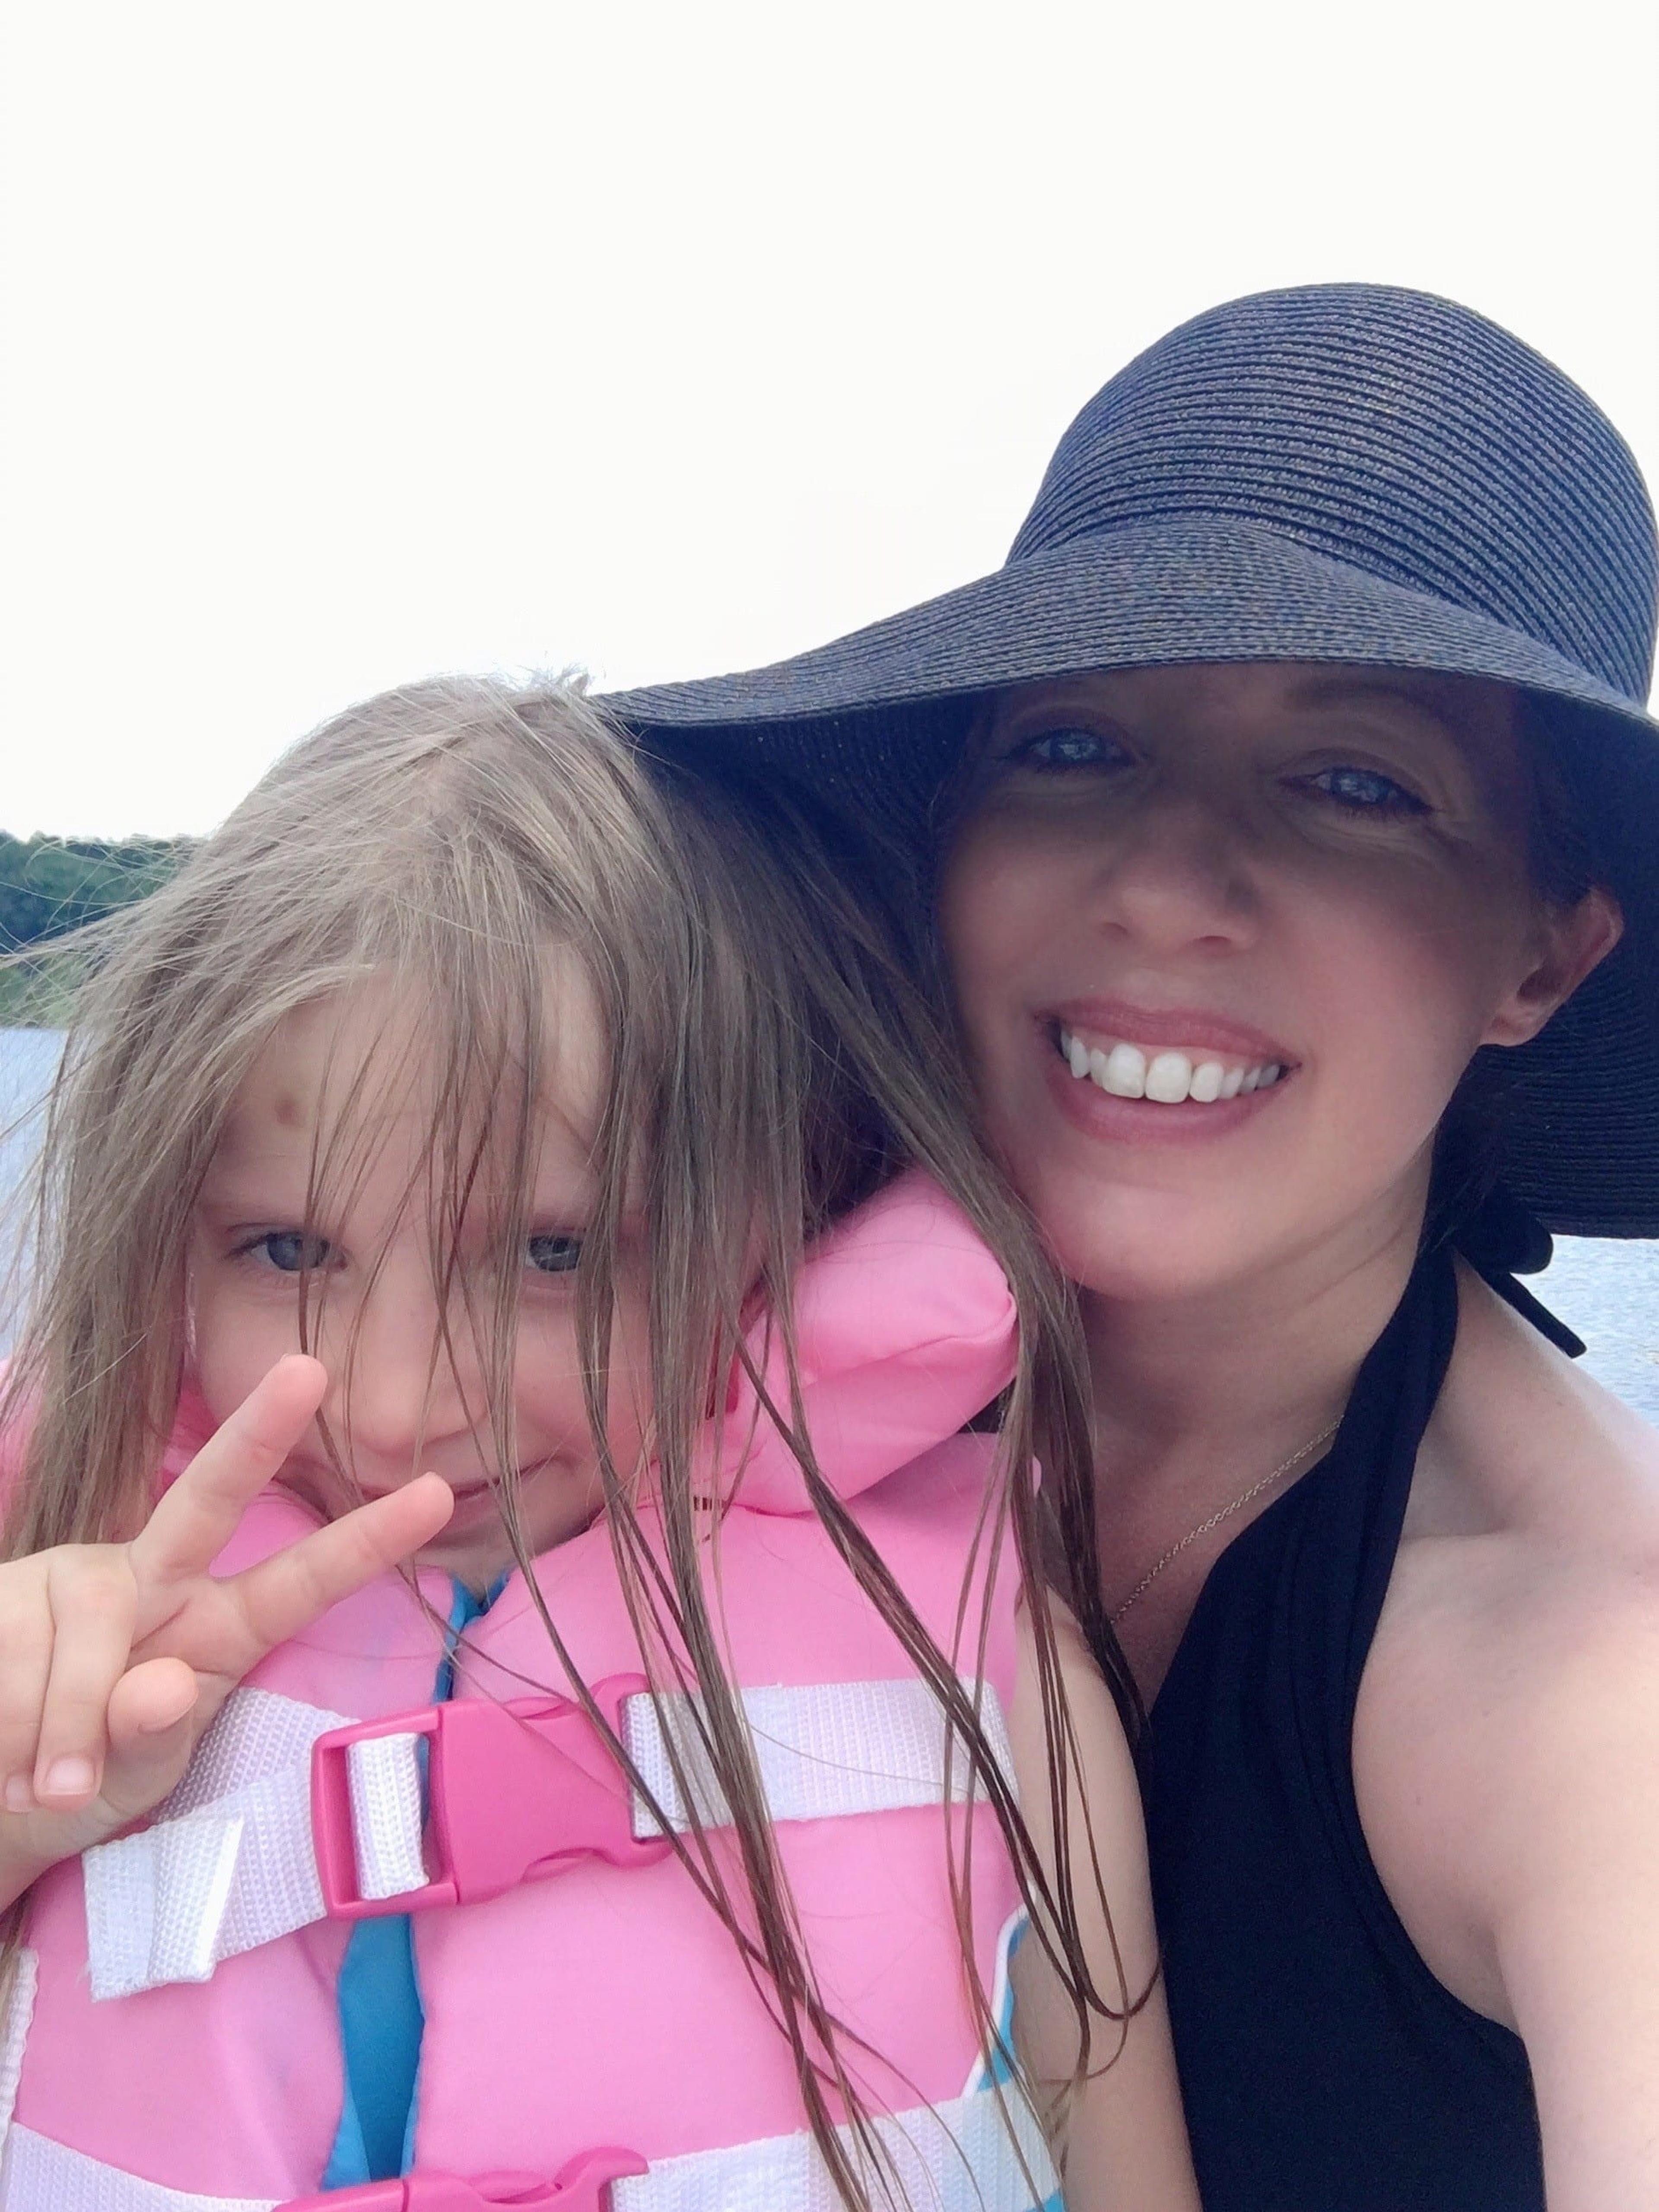 The author in a summer hat with her daughter